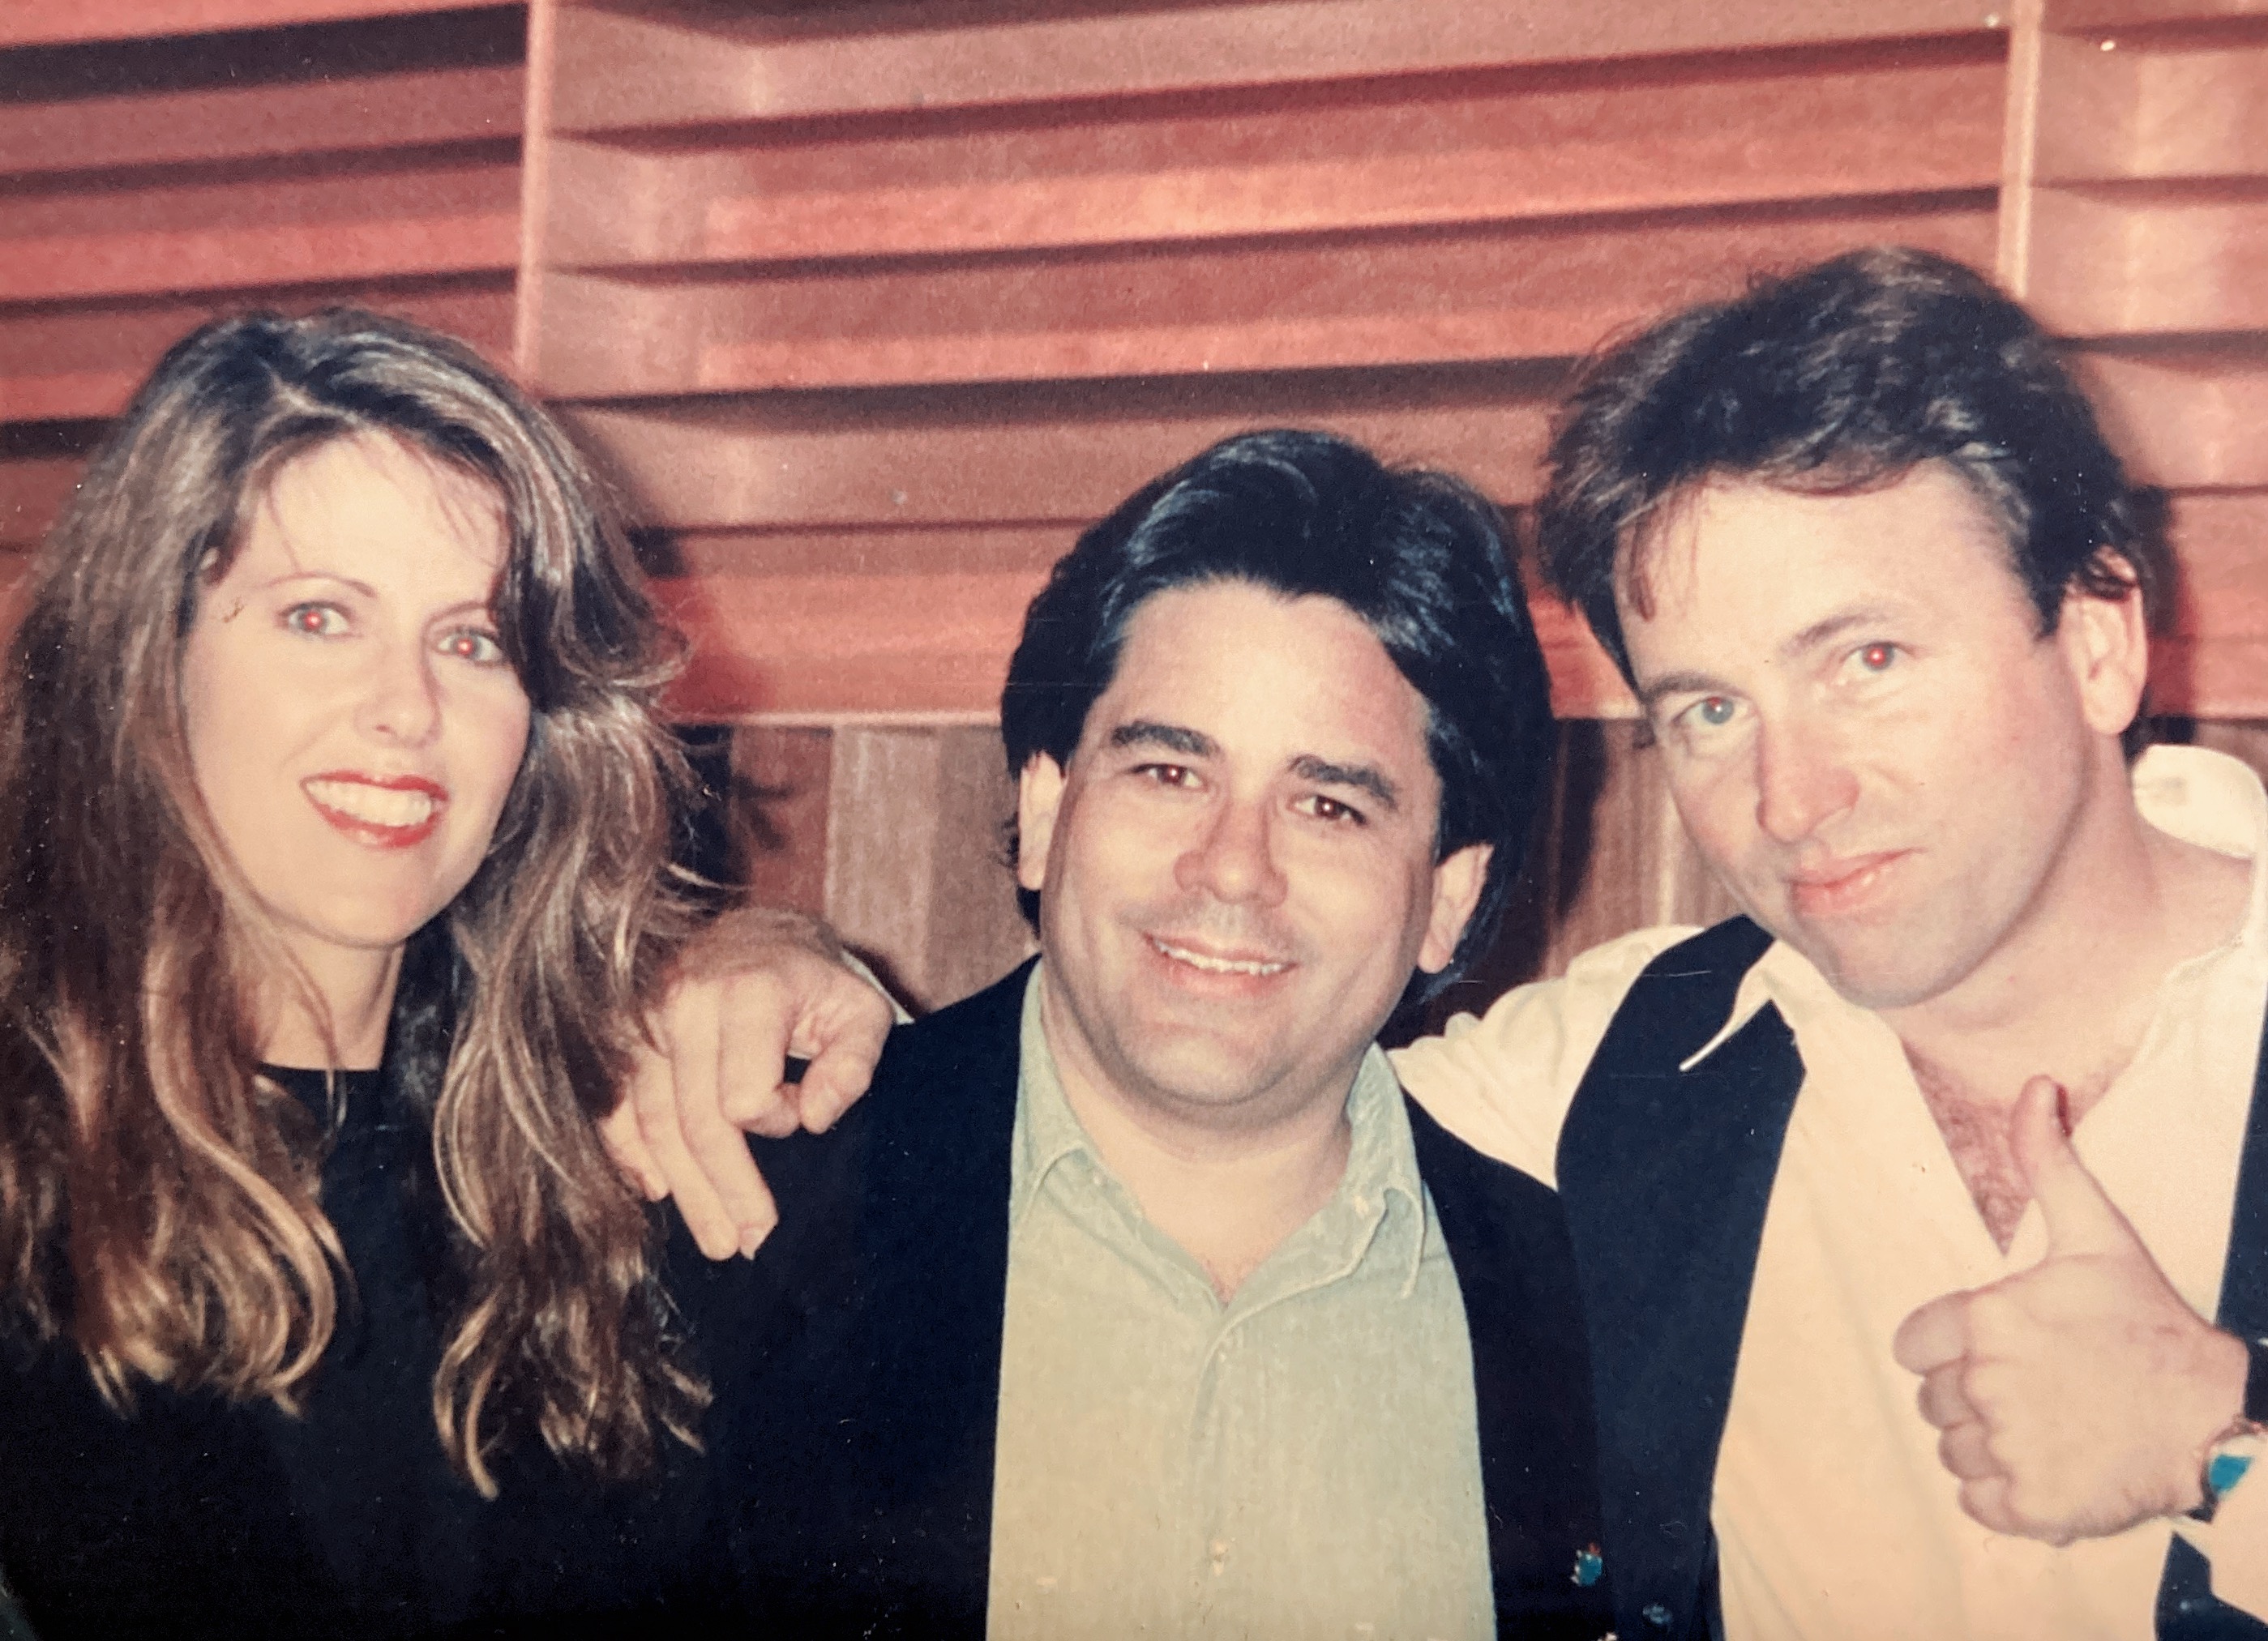 Me with Pam Dawber and John Ritter at the voice recording for stay tuned in 1991